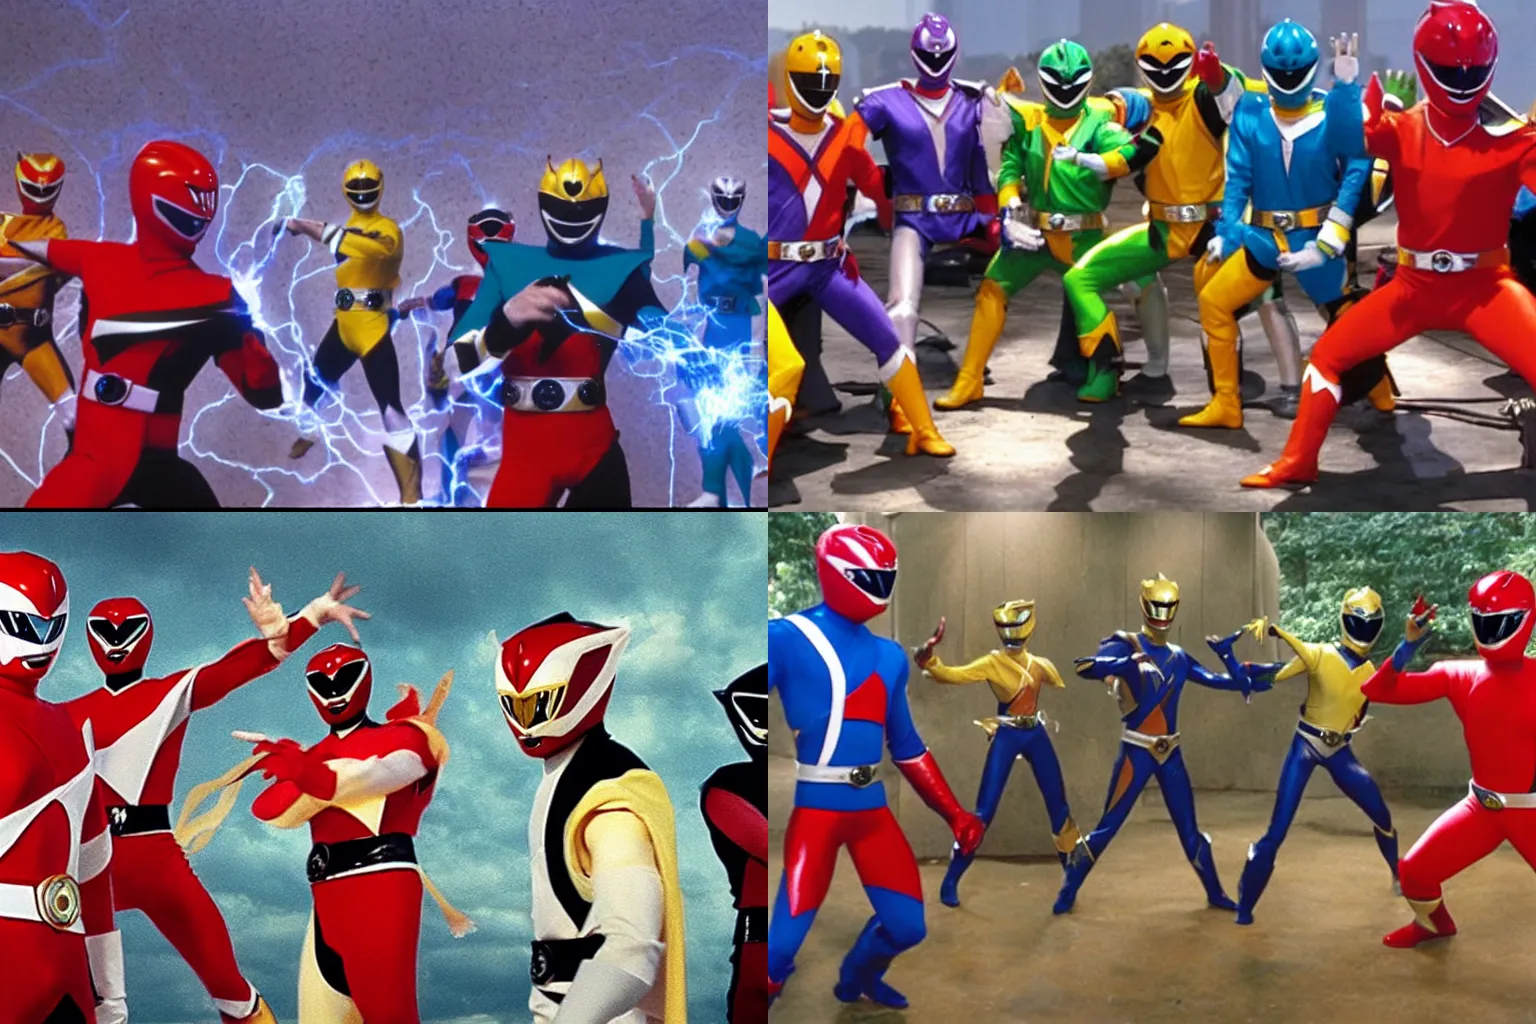 Prompt: a screenshot from an e-meeting of the power rangers